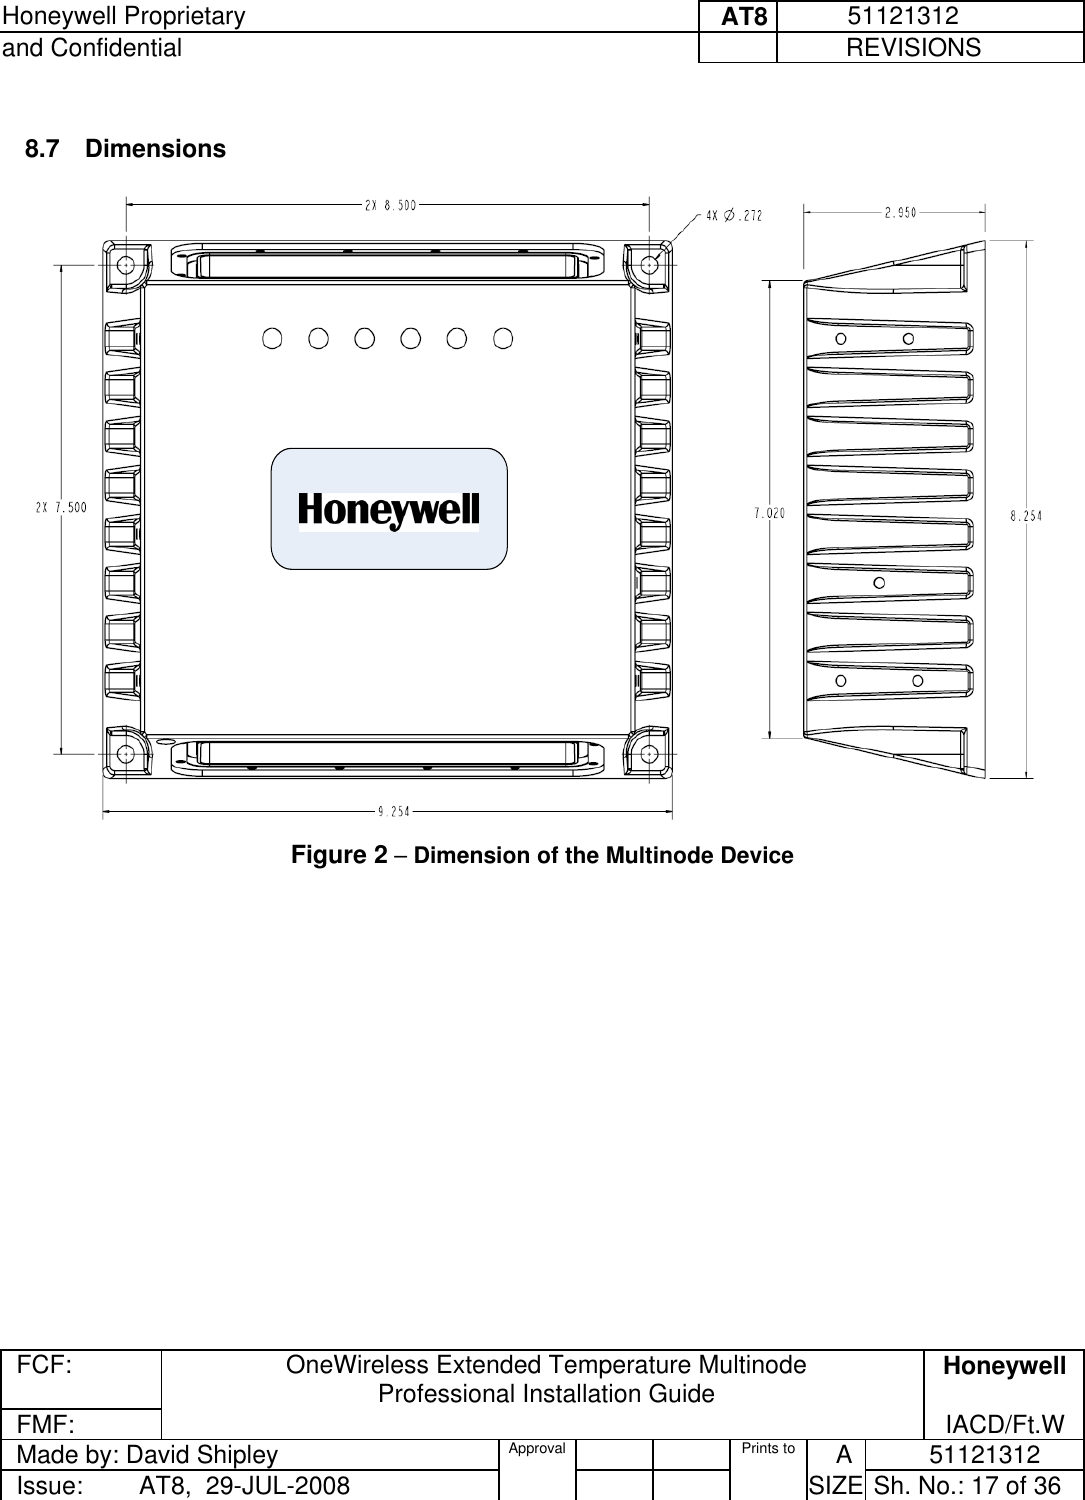 Honeywell Proprietary     AT8           51121312 and Confidential             REVISIONS  FCF: OneWireless Extended Temperature Multinode  Professional Installation Guide  Honeywell FMF:               IACD/Ft.W Made by: David Shipley  Approval   Prints to     A           51121312 Issue:        AT8,  29-JUL-2008          SIZE  Sh. No.: 17 of 36   8.7 Dimensions   Figure 2 – Dimension of the Multinode Device   